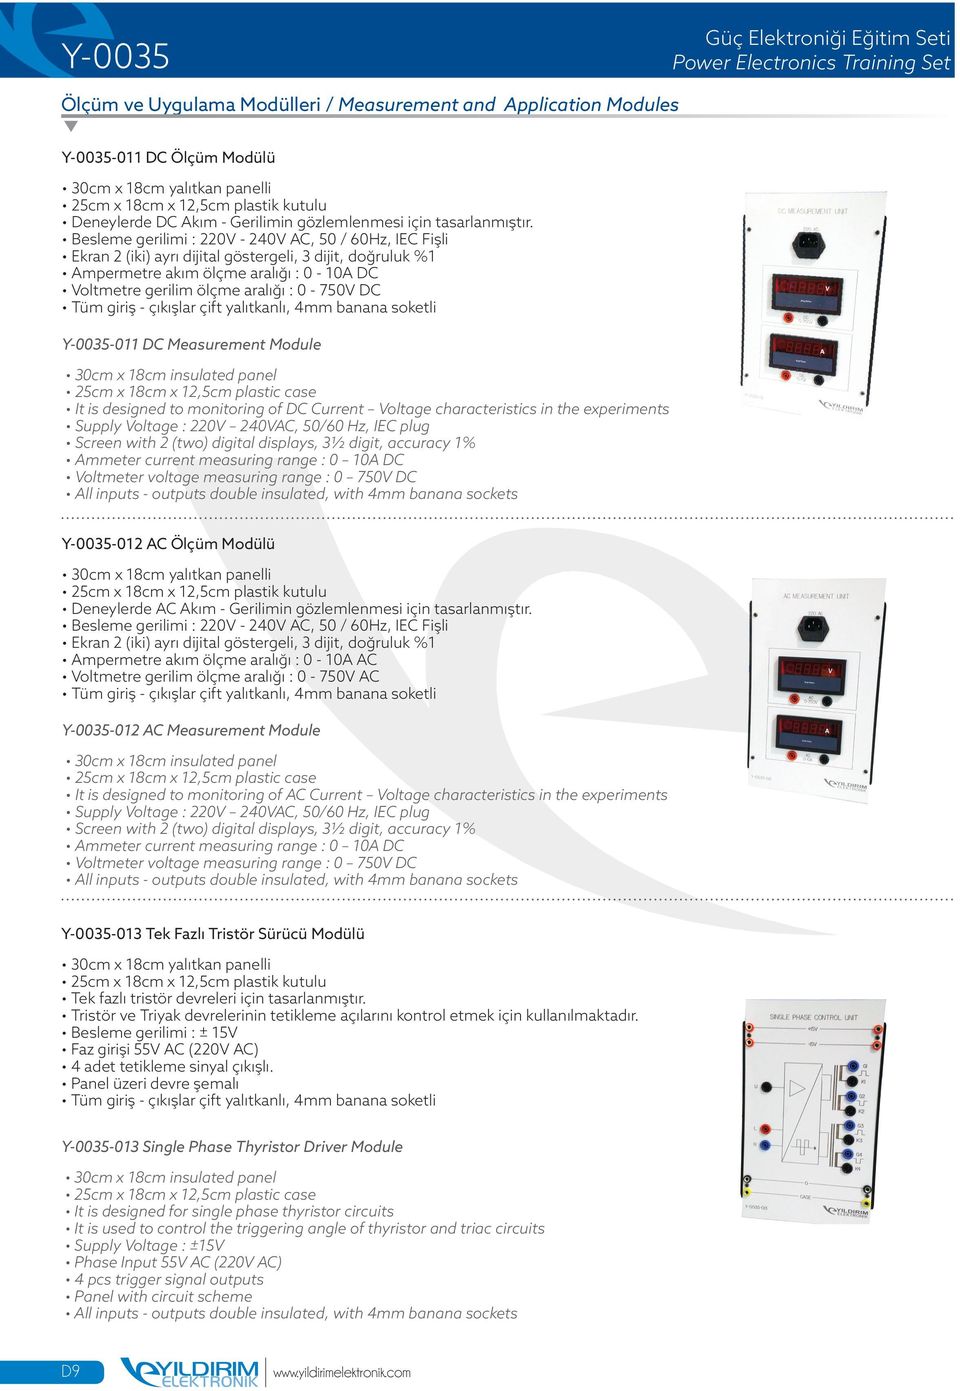 DC Y-0035-011 DC Measurement Module It is designed to monitoring of DC Current Voltage characteristics in the experiments Supply Voltage : 220V 240VAC, 50/60 Hz, IEC plug Screen with 2 (two) digital